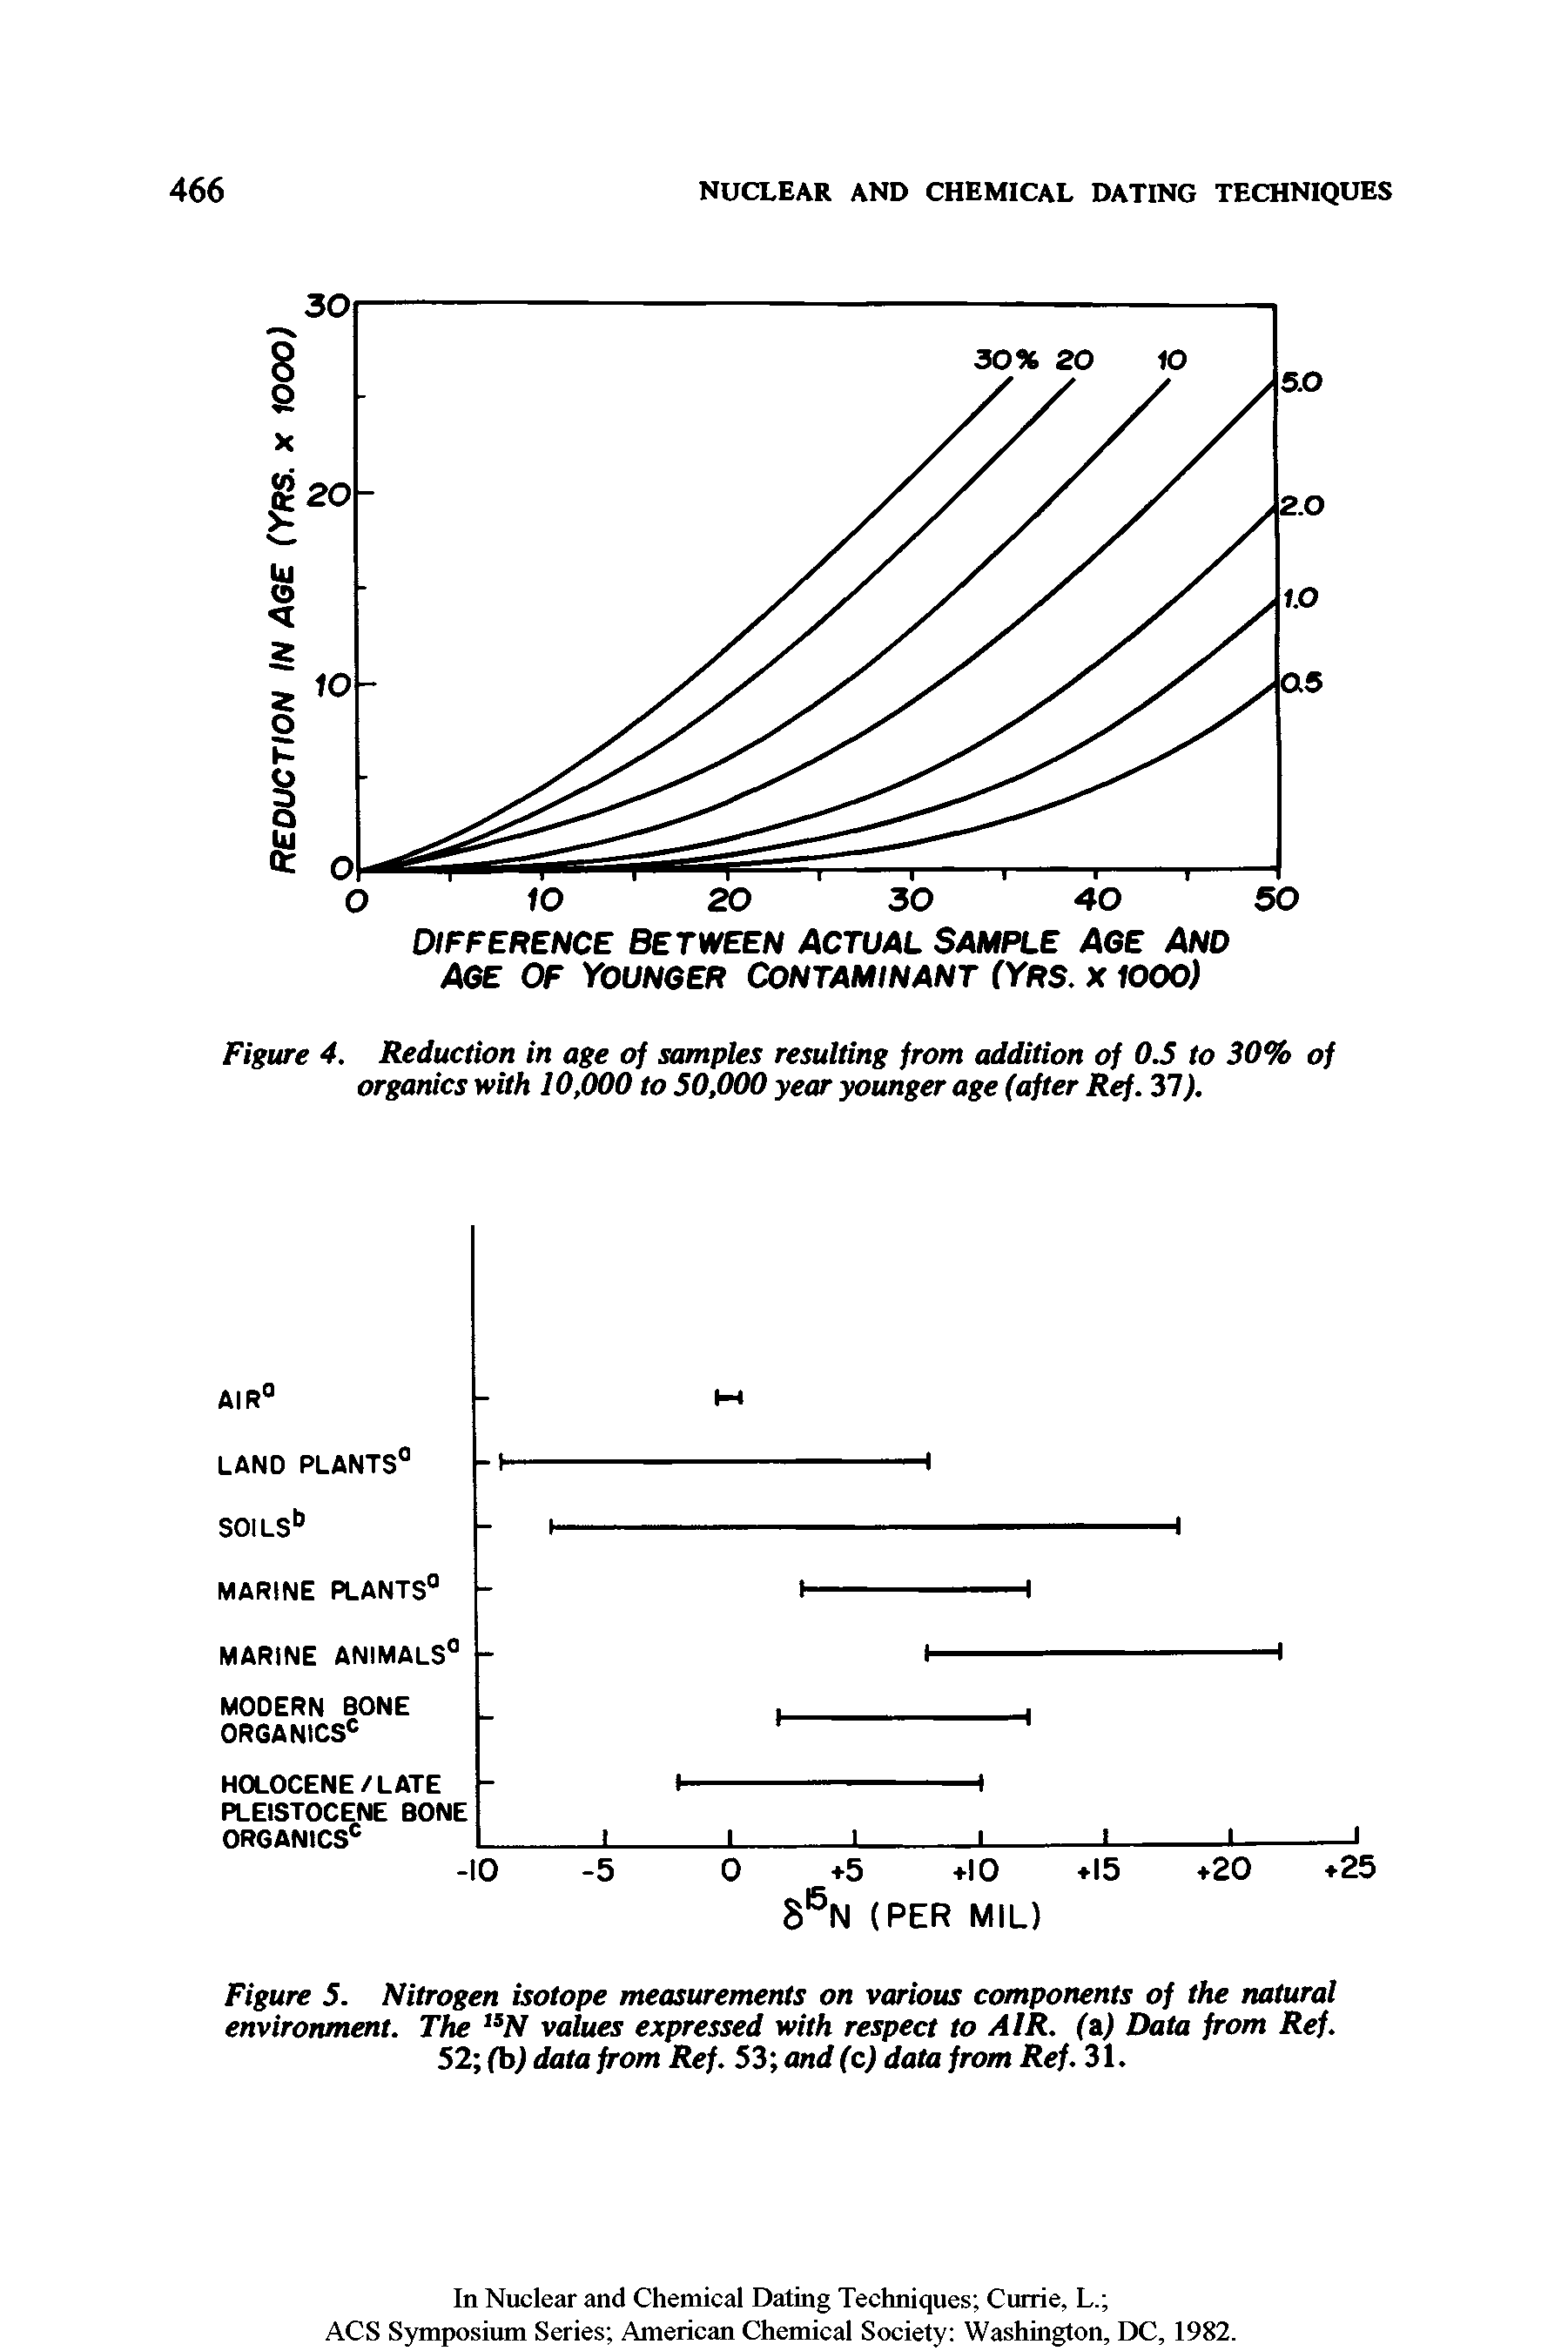 Figure 5. Nitrogen isotope measurements on various components of the natural environment. The 15N values expressed with respect to AIR. (z) Data from Ref. 52 (b) data from Ref. 53 and (c) data from Ref. 31.